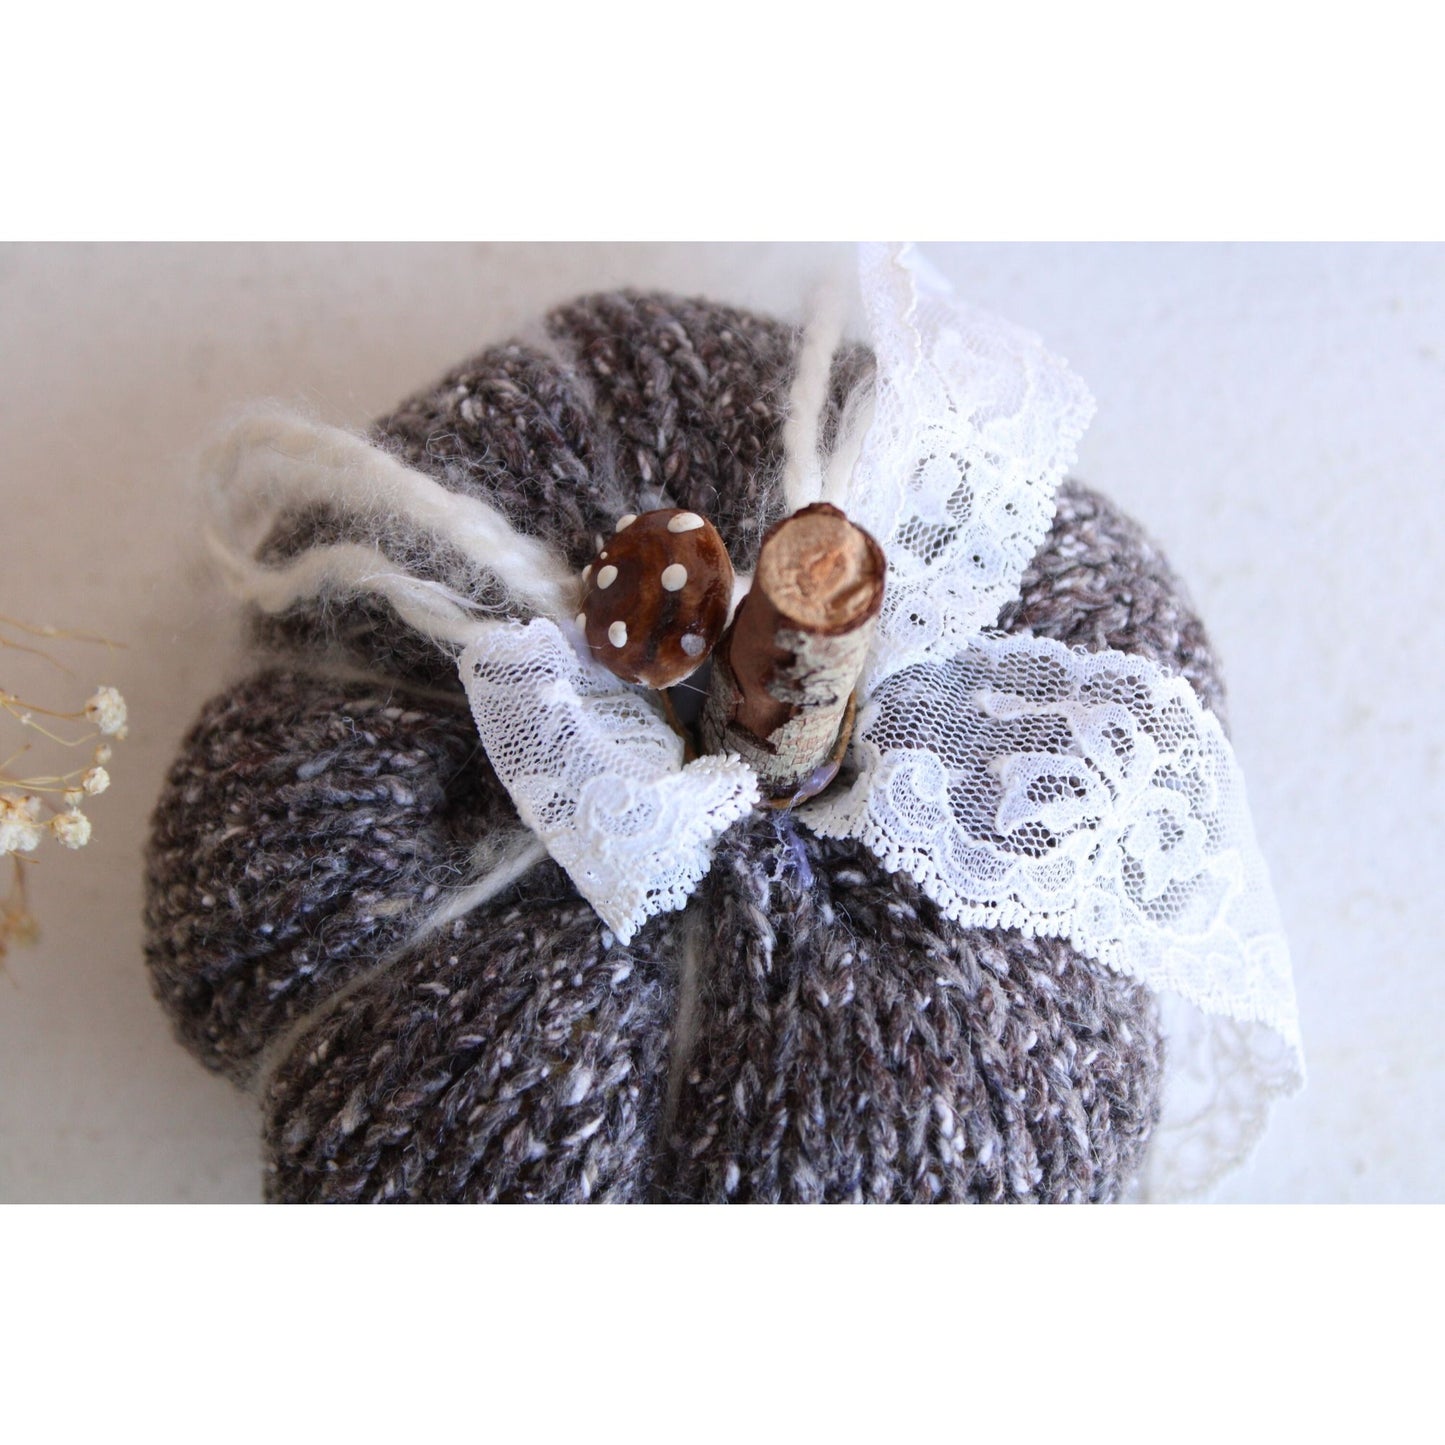 Mini Knit Pumpkin Pillow Pouf in Gray with Vintage Lace, Toadstools, and Wooden Stem